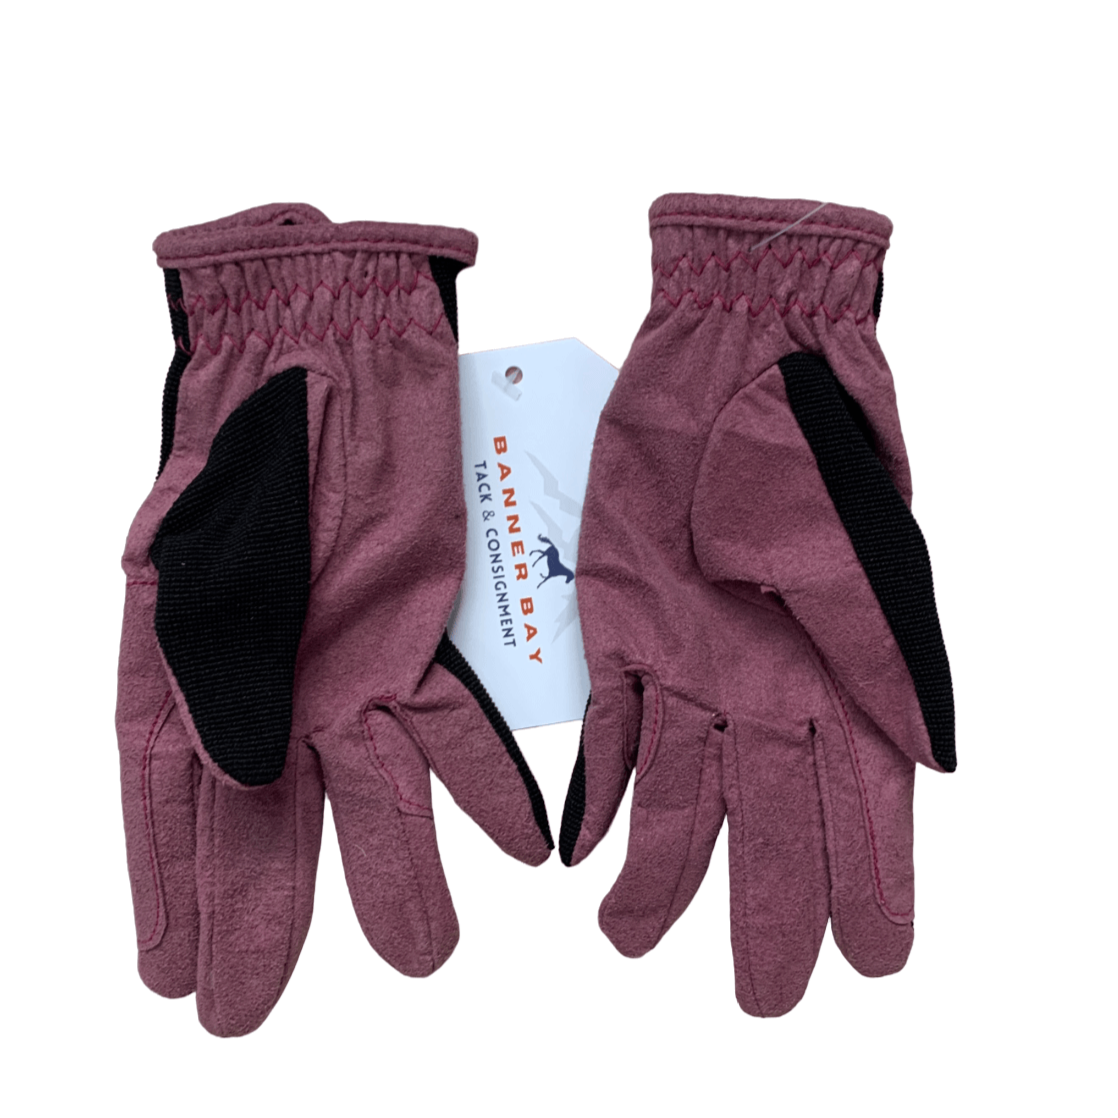 Moxie 2-Tone Comfort-Fit Kids Riding Gloves 